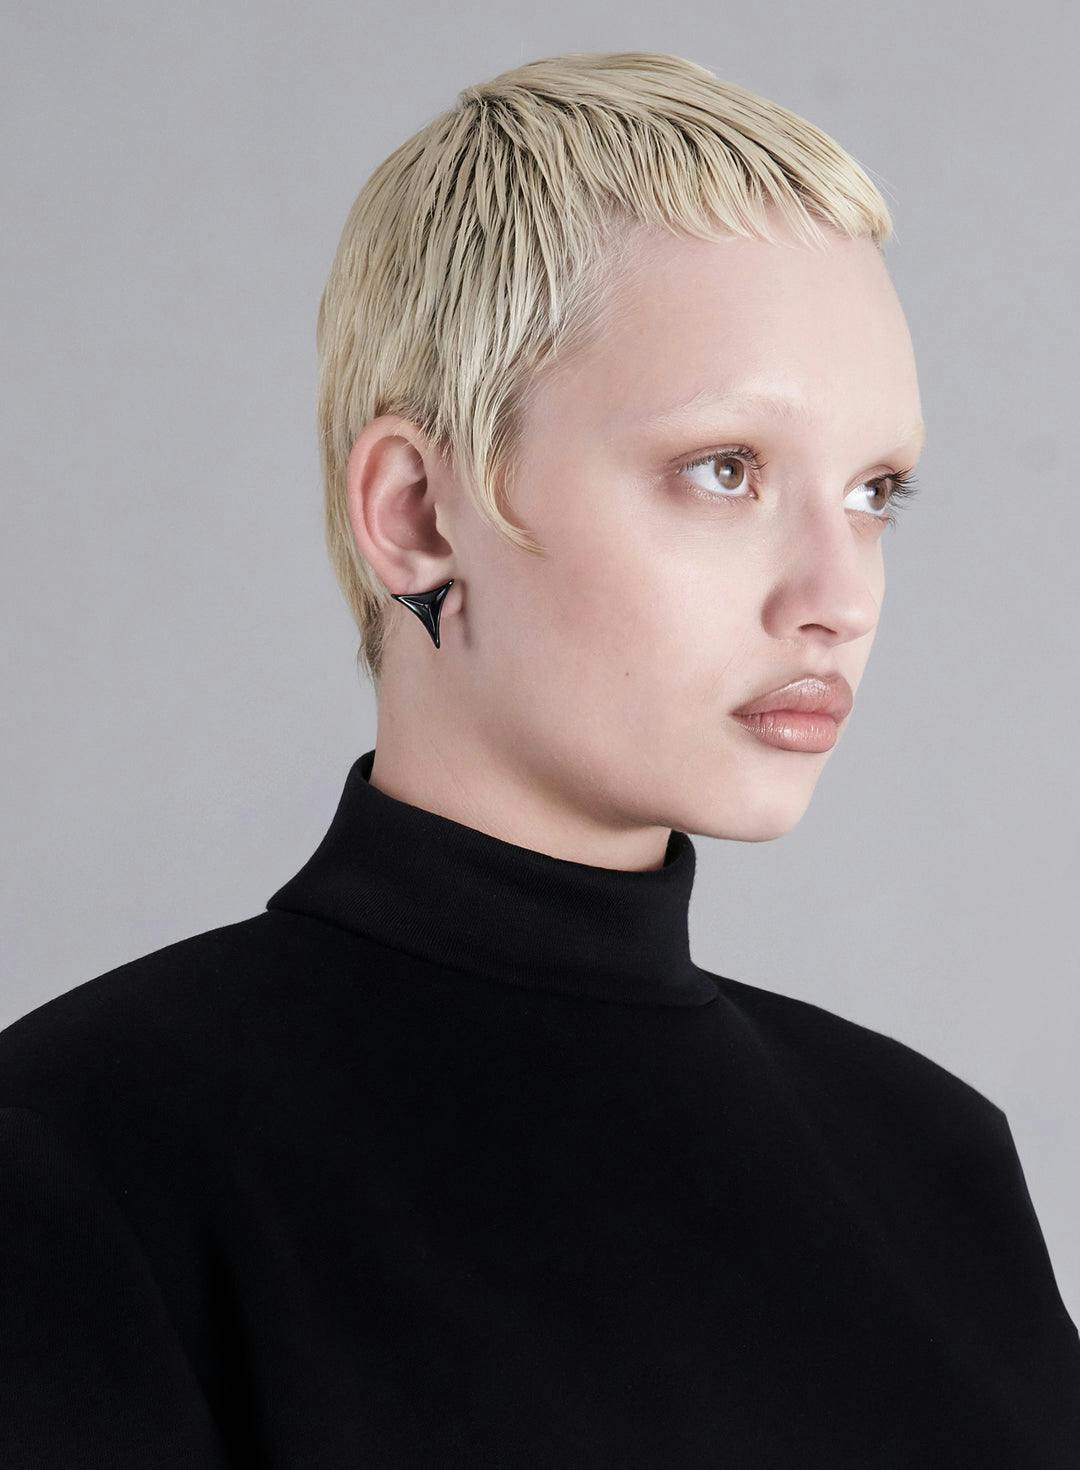 Secondary image of The Trilogy Earring Petroleum Black